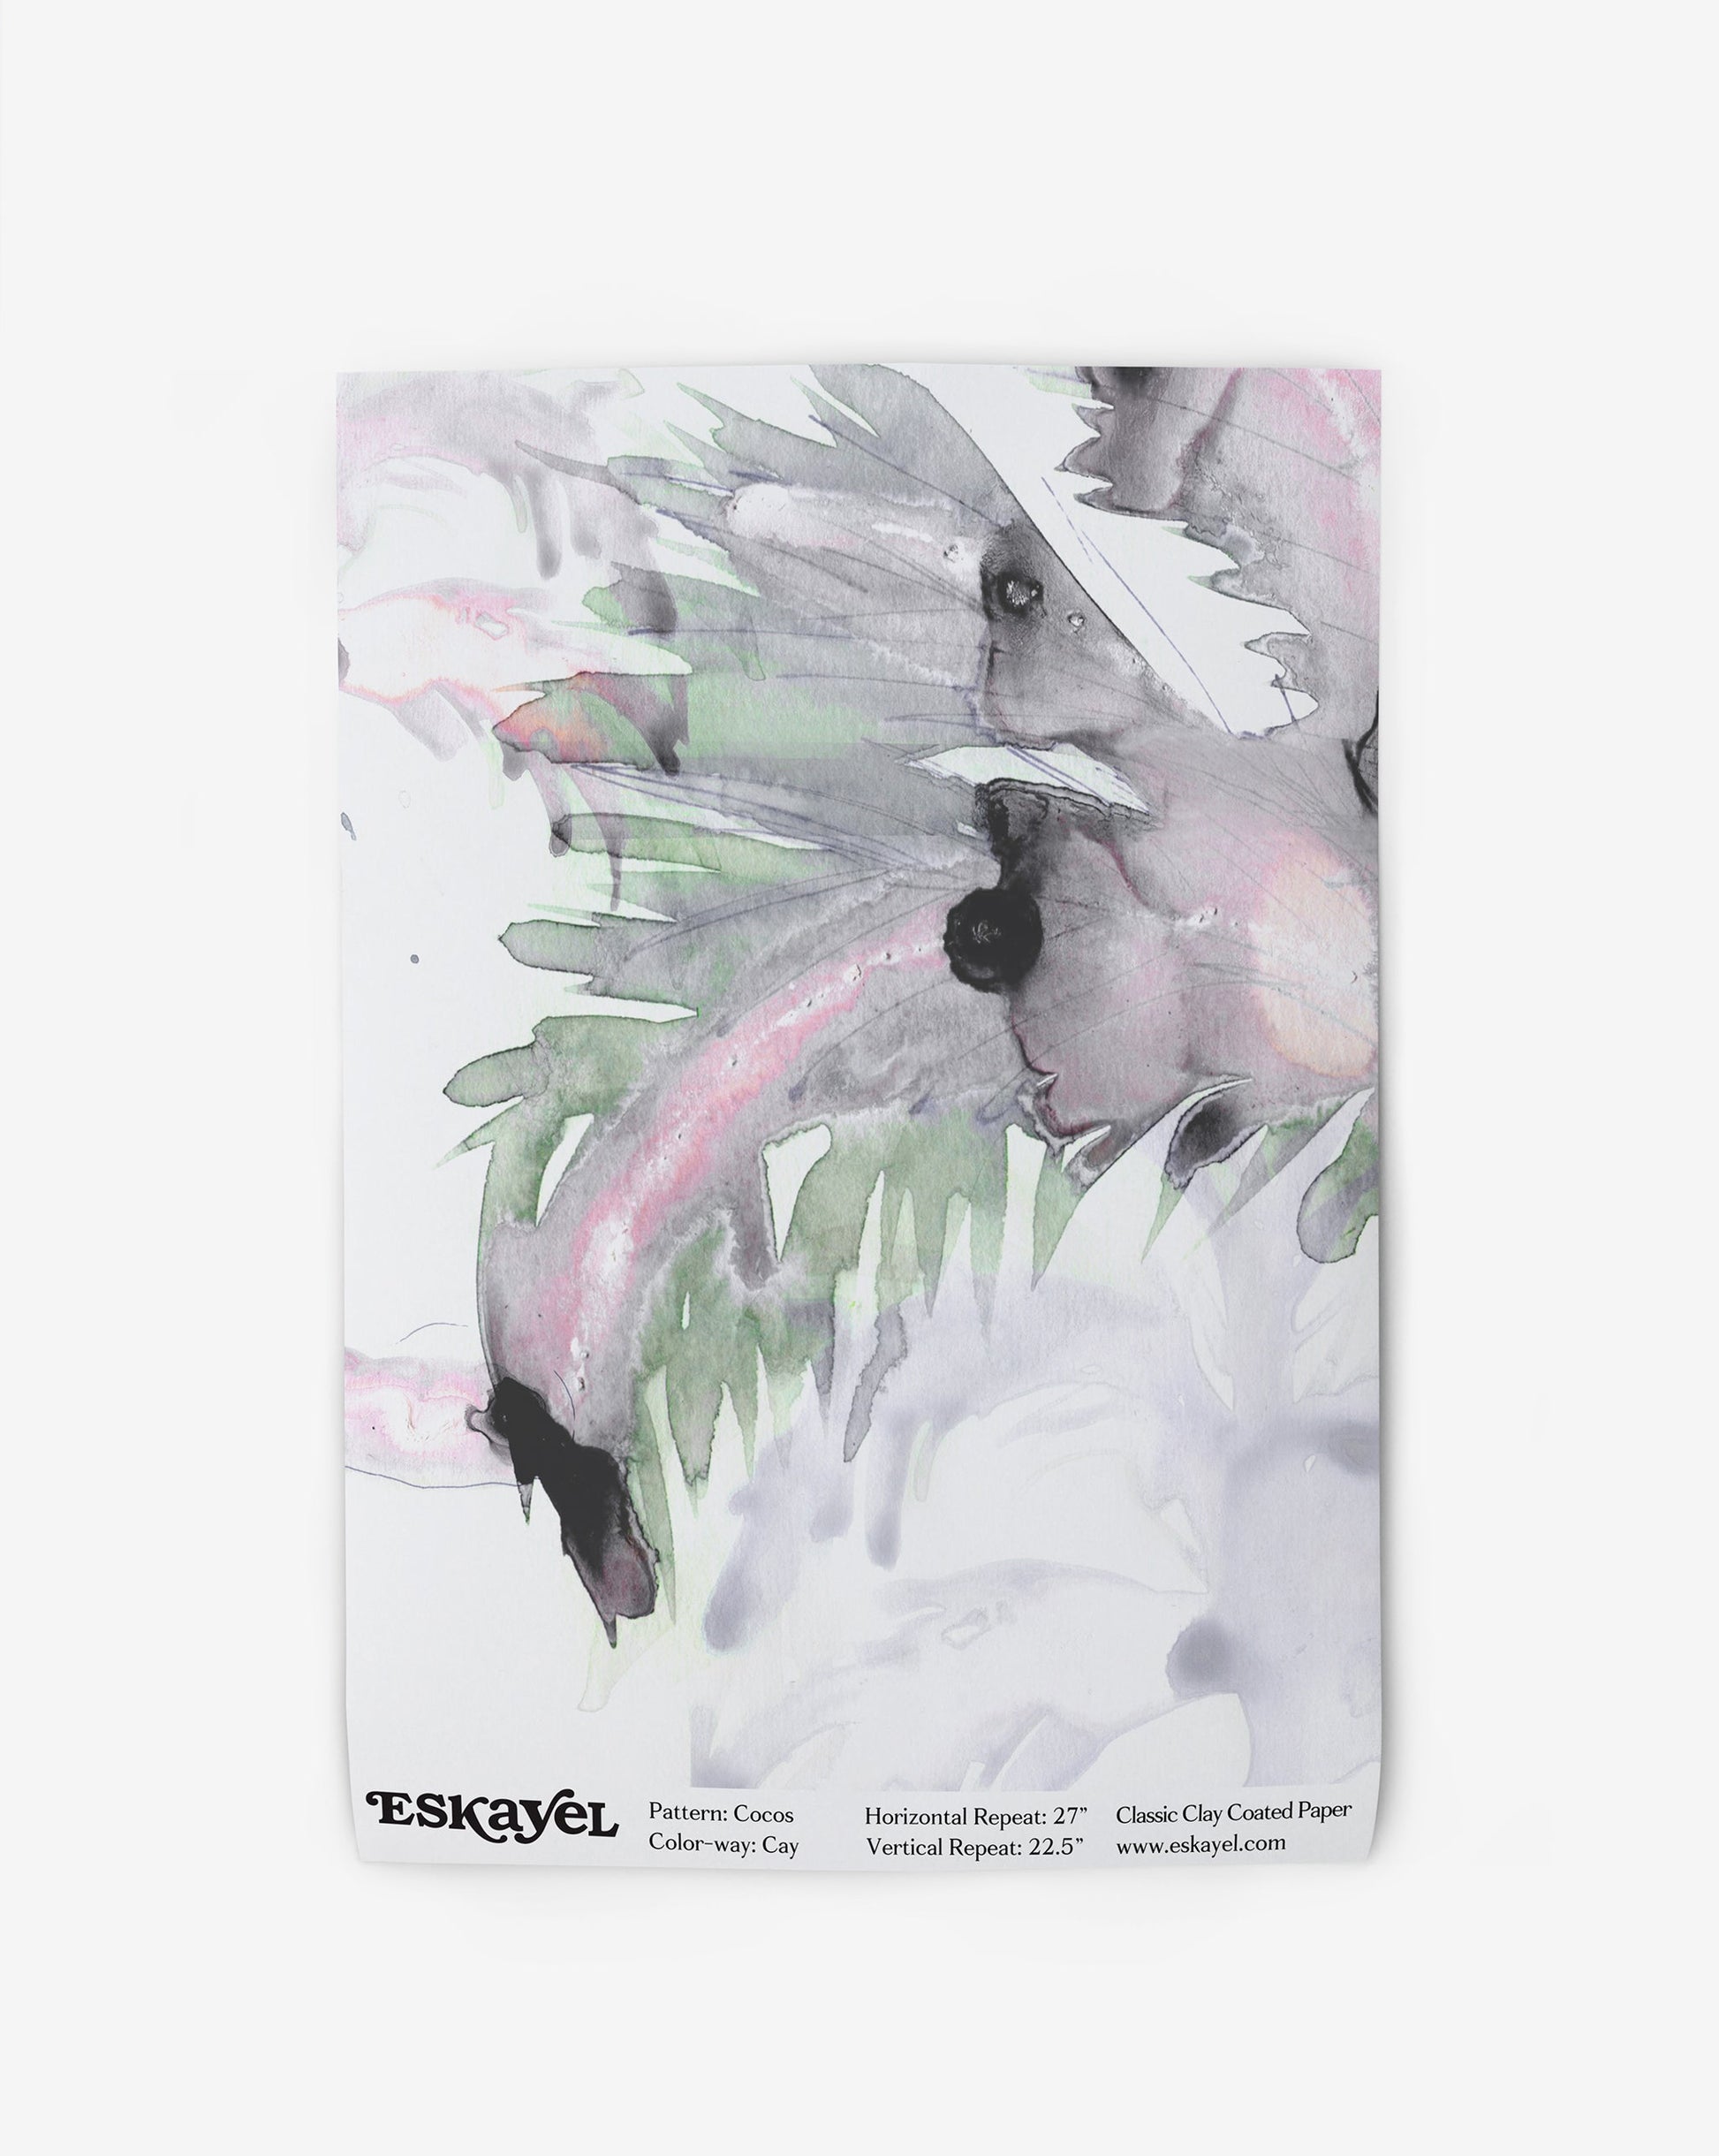 Abstract watercolor painting featuring soft, blending strokes of green, pink, and black on a white background, displayed with a title and details along the bottom edge. This artistic piece highlights the benefits of calming Cocos Wallpaper Sample||Cay.